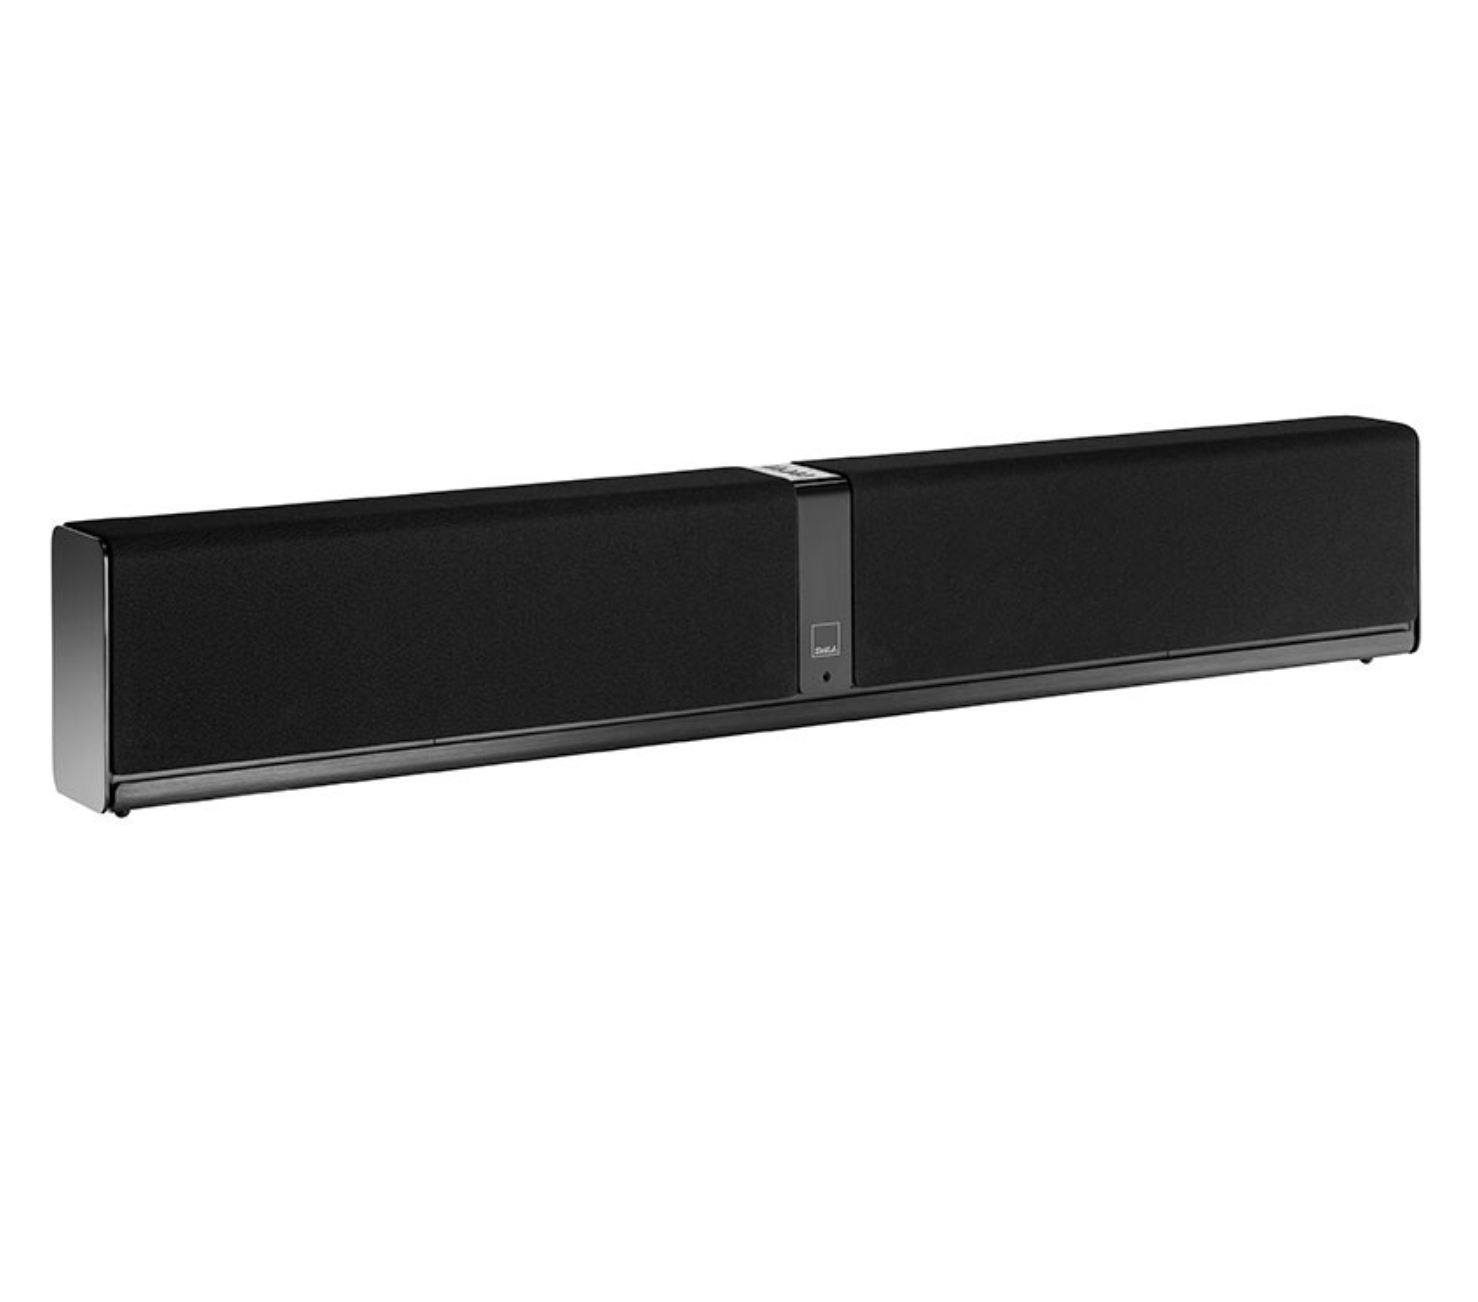 The best cheap Cyber Monday soundbar deals that are still live – Sonos, Sony, Samsung, Yamaha, Bose and more